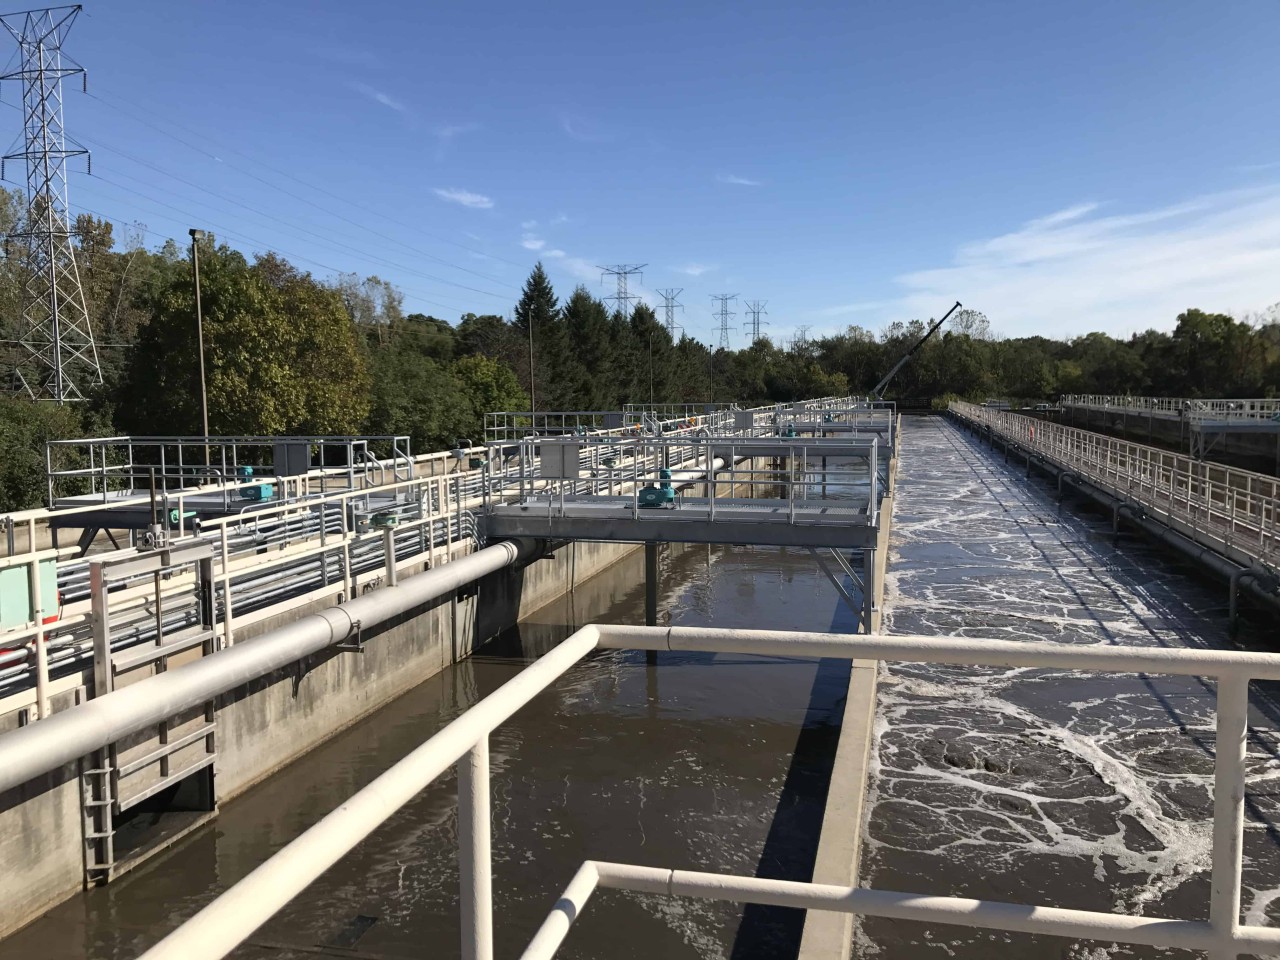 DuPage County Knollwood wastewater treatment plant, Illinois